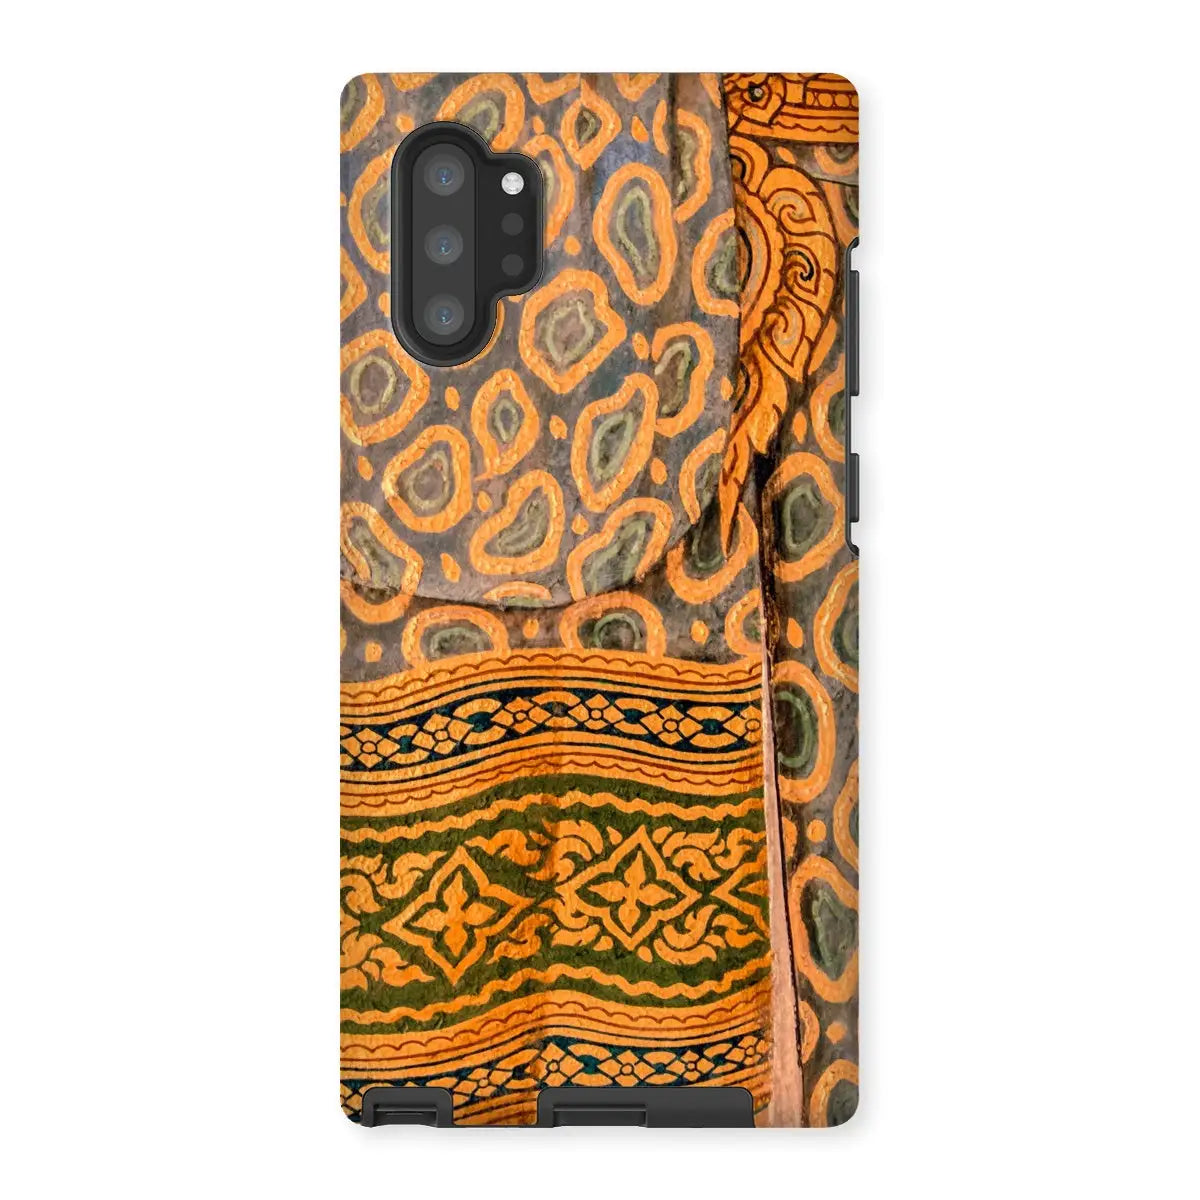 Lady In Waiting - Royal Siam Mural Art Phone Case - Samsung Galaxy Note 10p / Matte - Mobile Phone Cases - Aesthetic Art